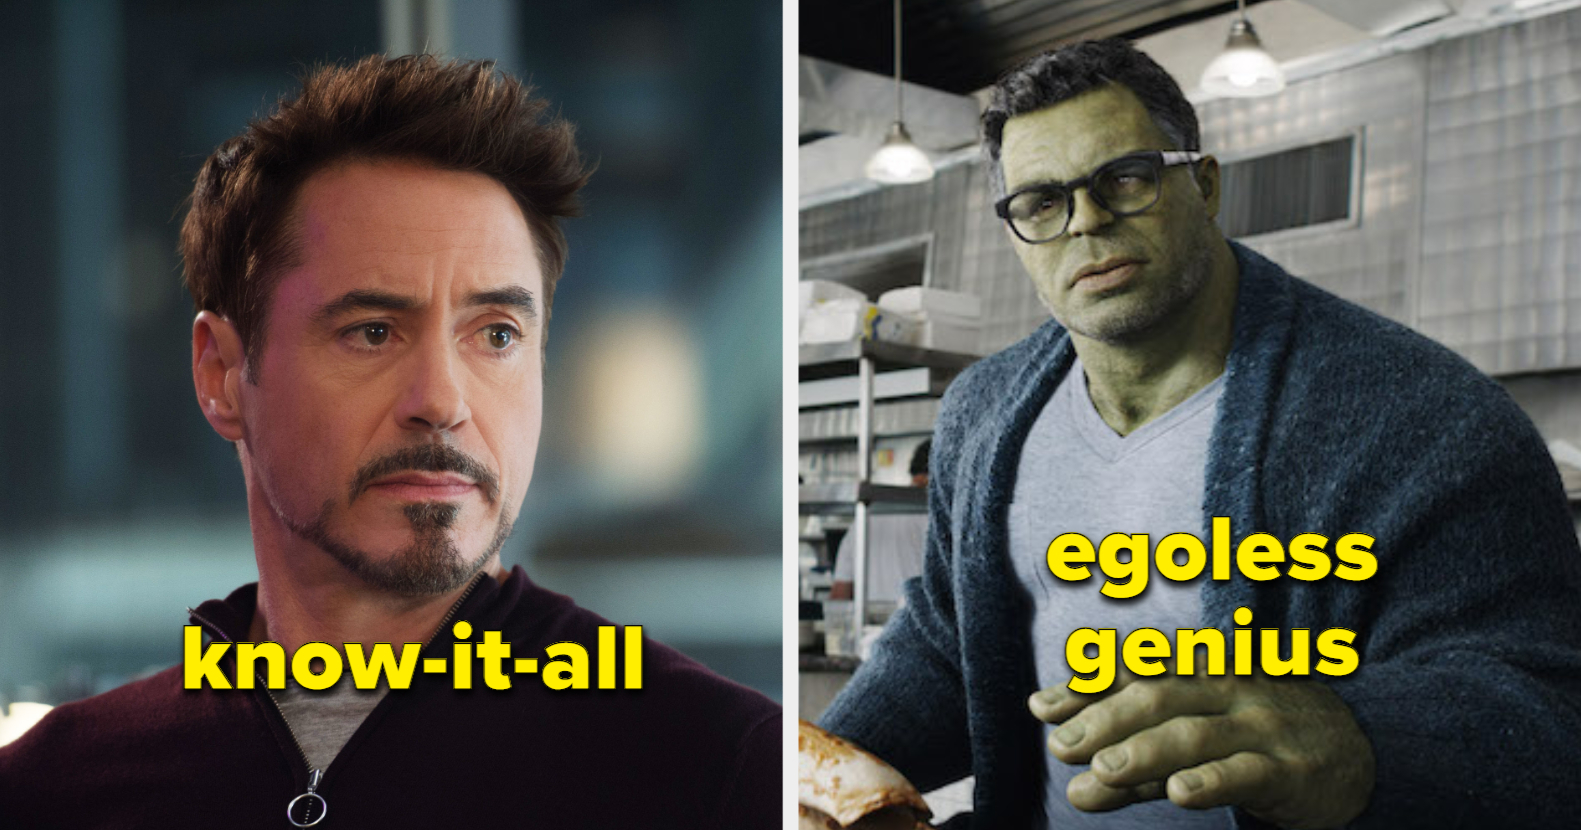 Your job is to assign each of the MCU characters to a cabin at